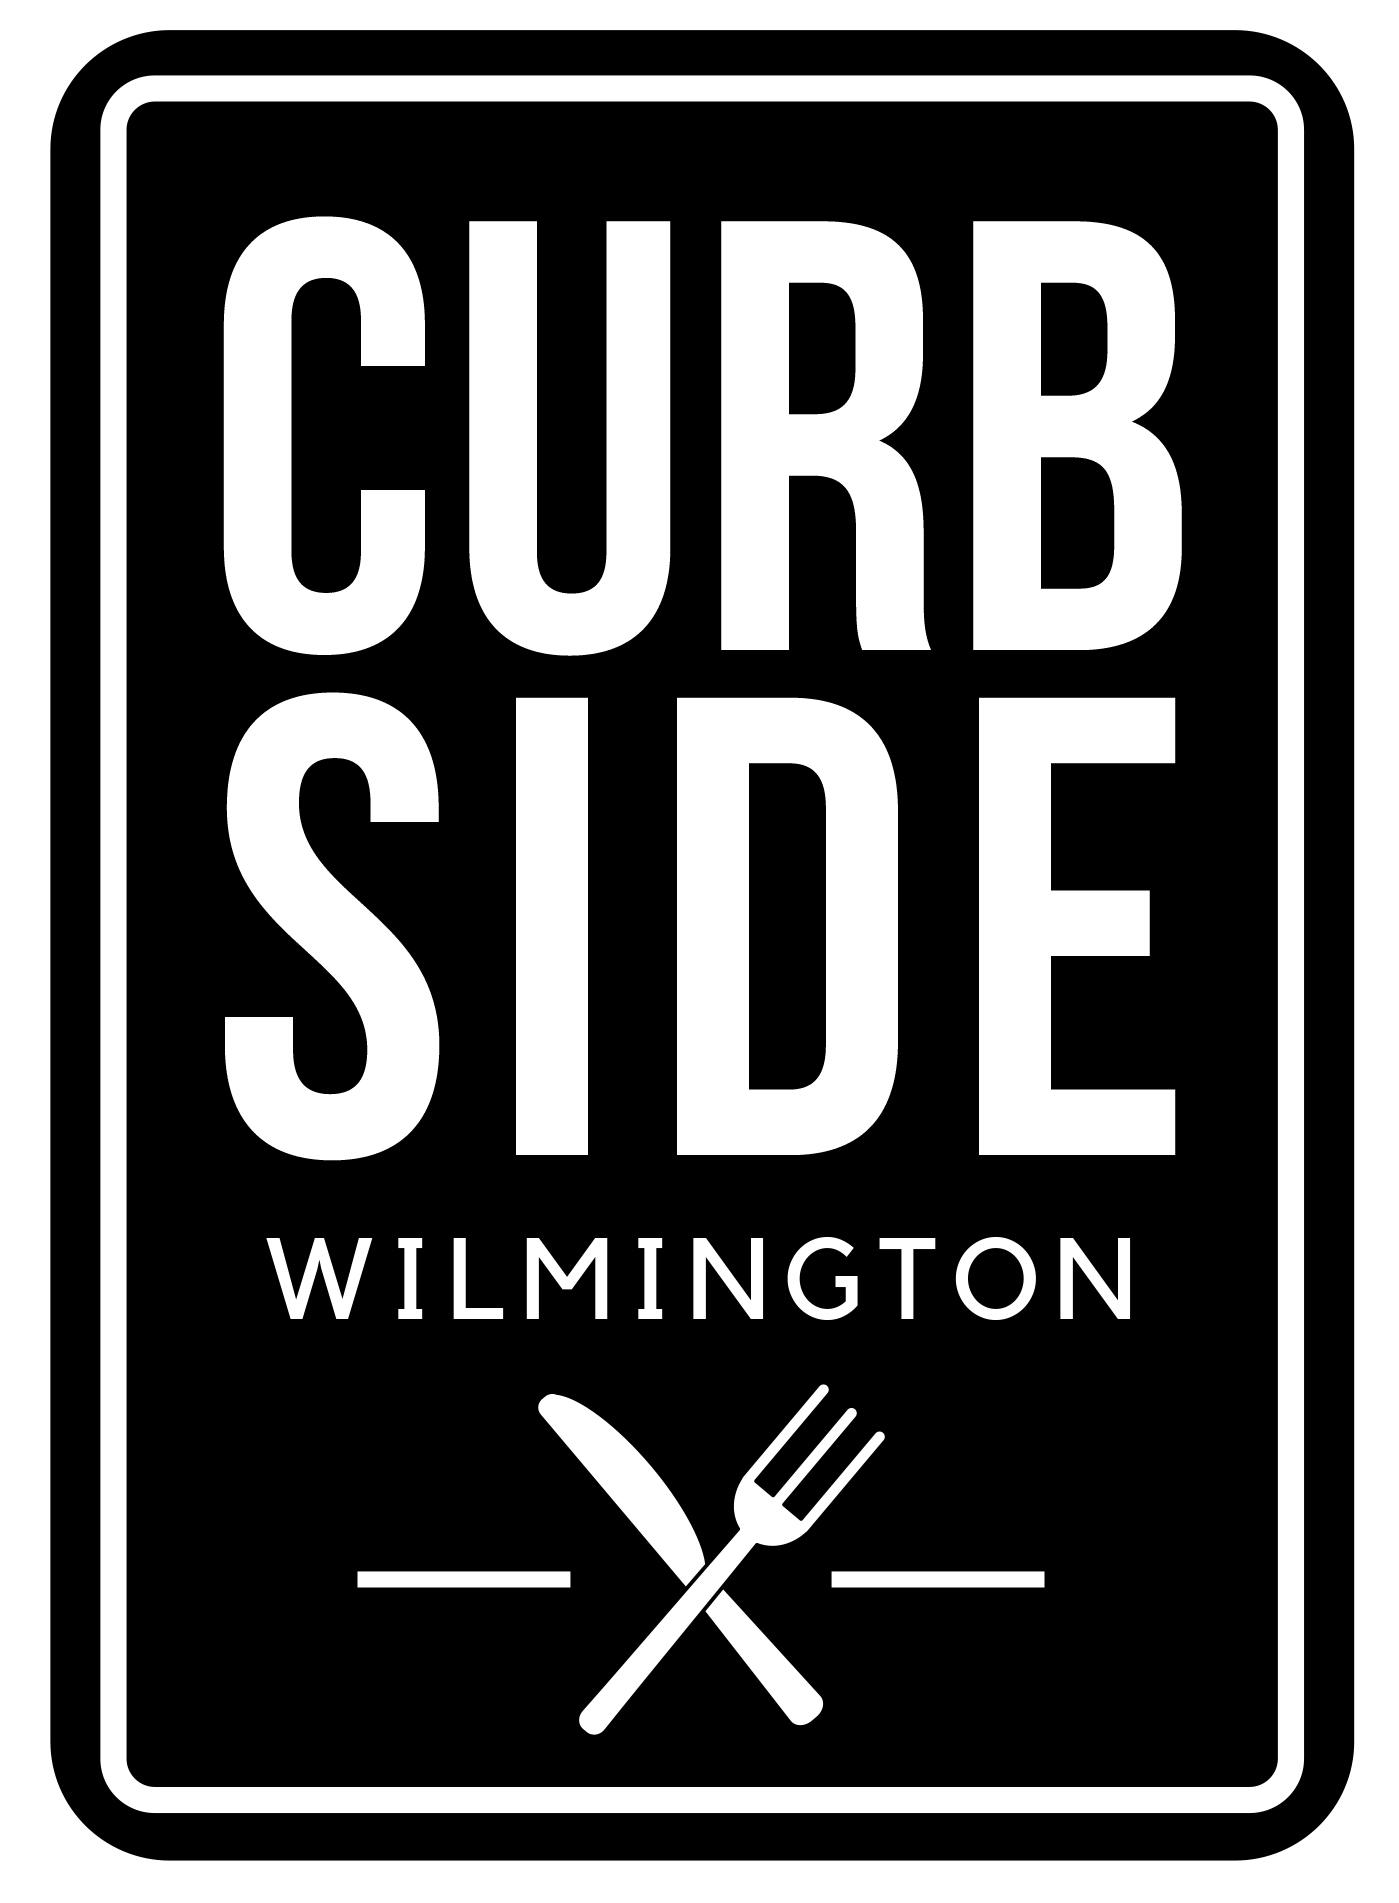 The Curbside Dining Wilmington logo.